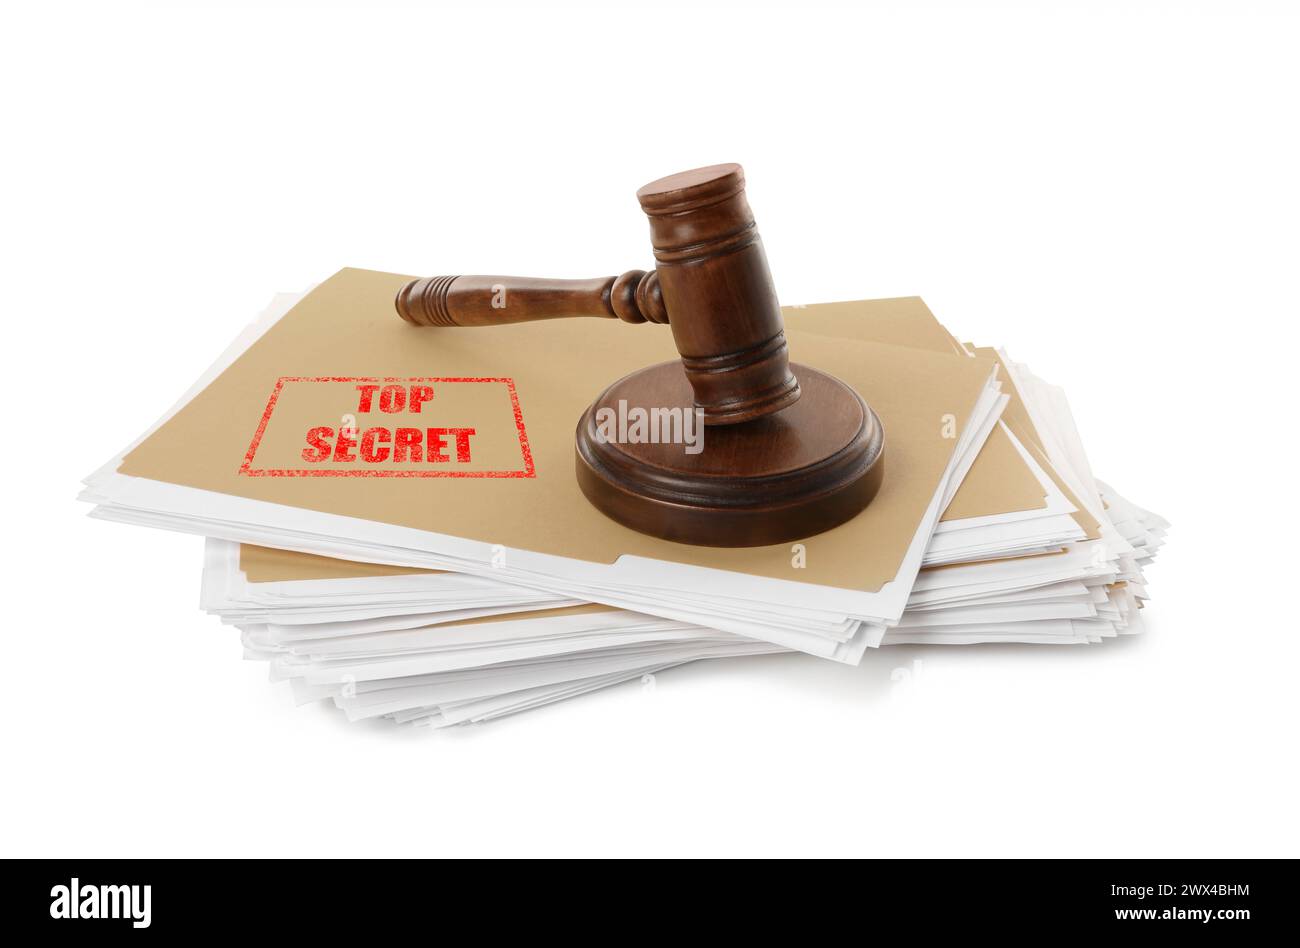 Top Secret stamp. Files with documents and wooden gavel on white background Stock Photo